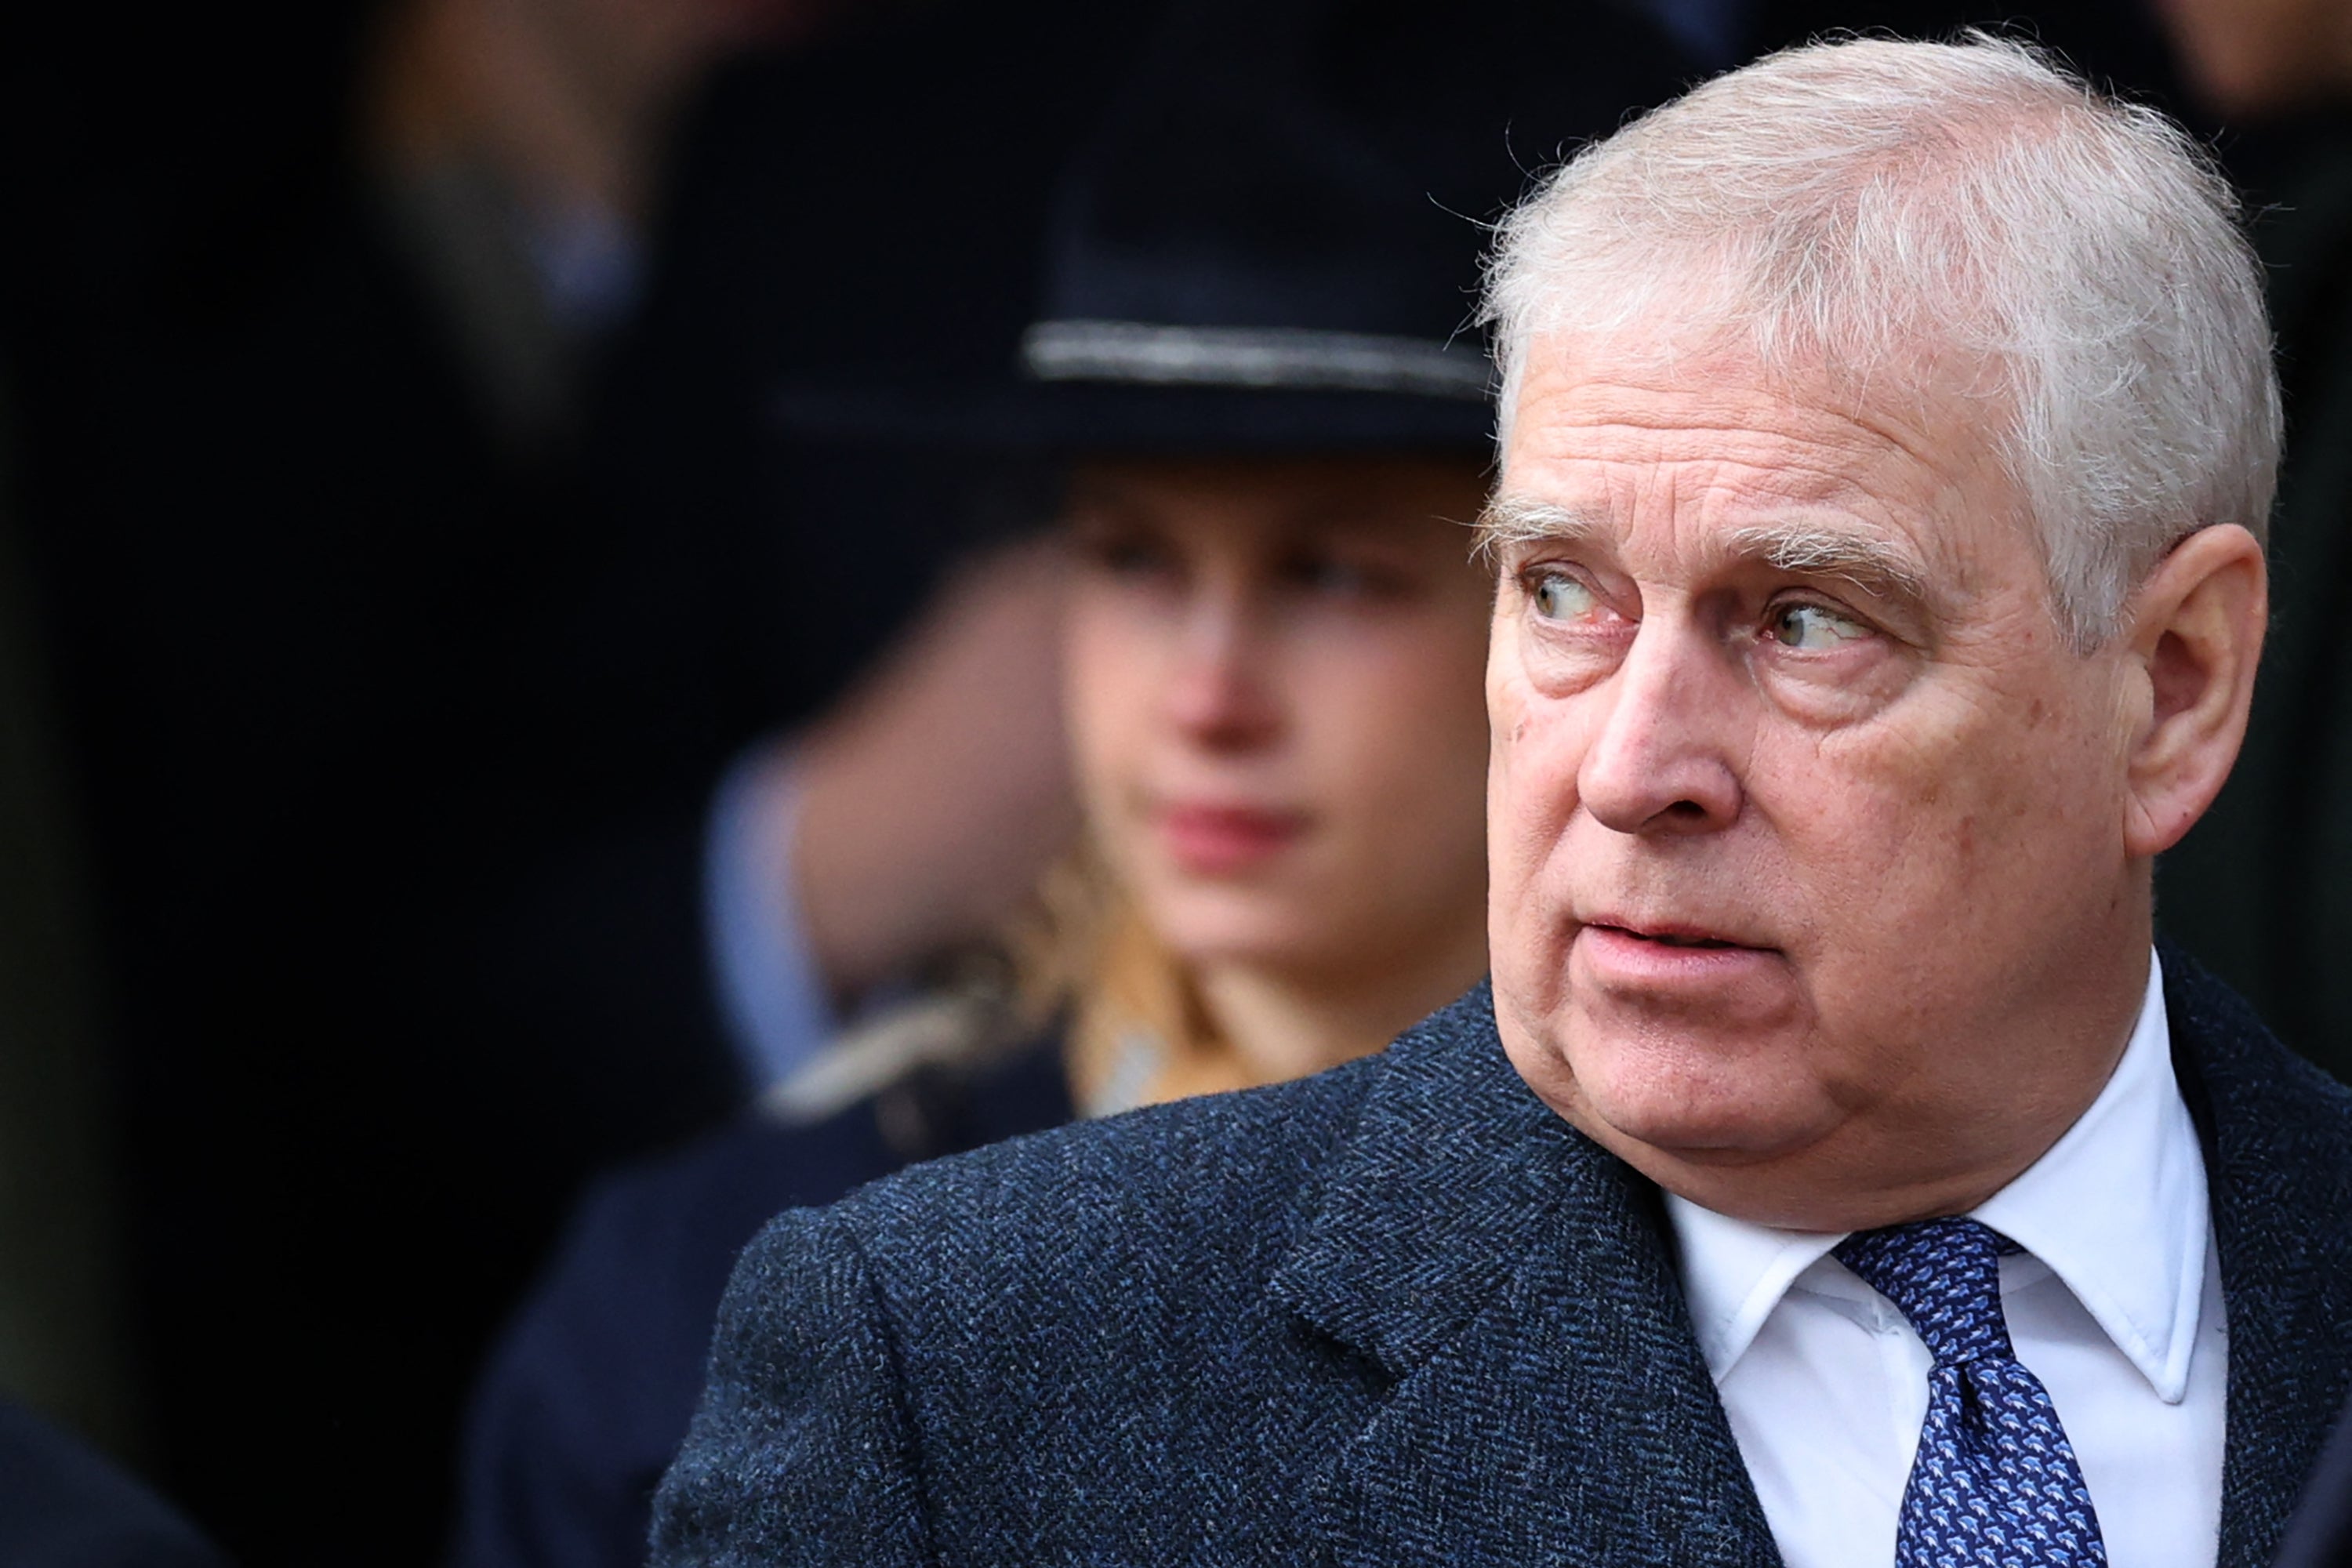 Prince Andrew has been the focus of many headlines over the release of legal papers linked to Jeffrey Epstein